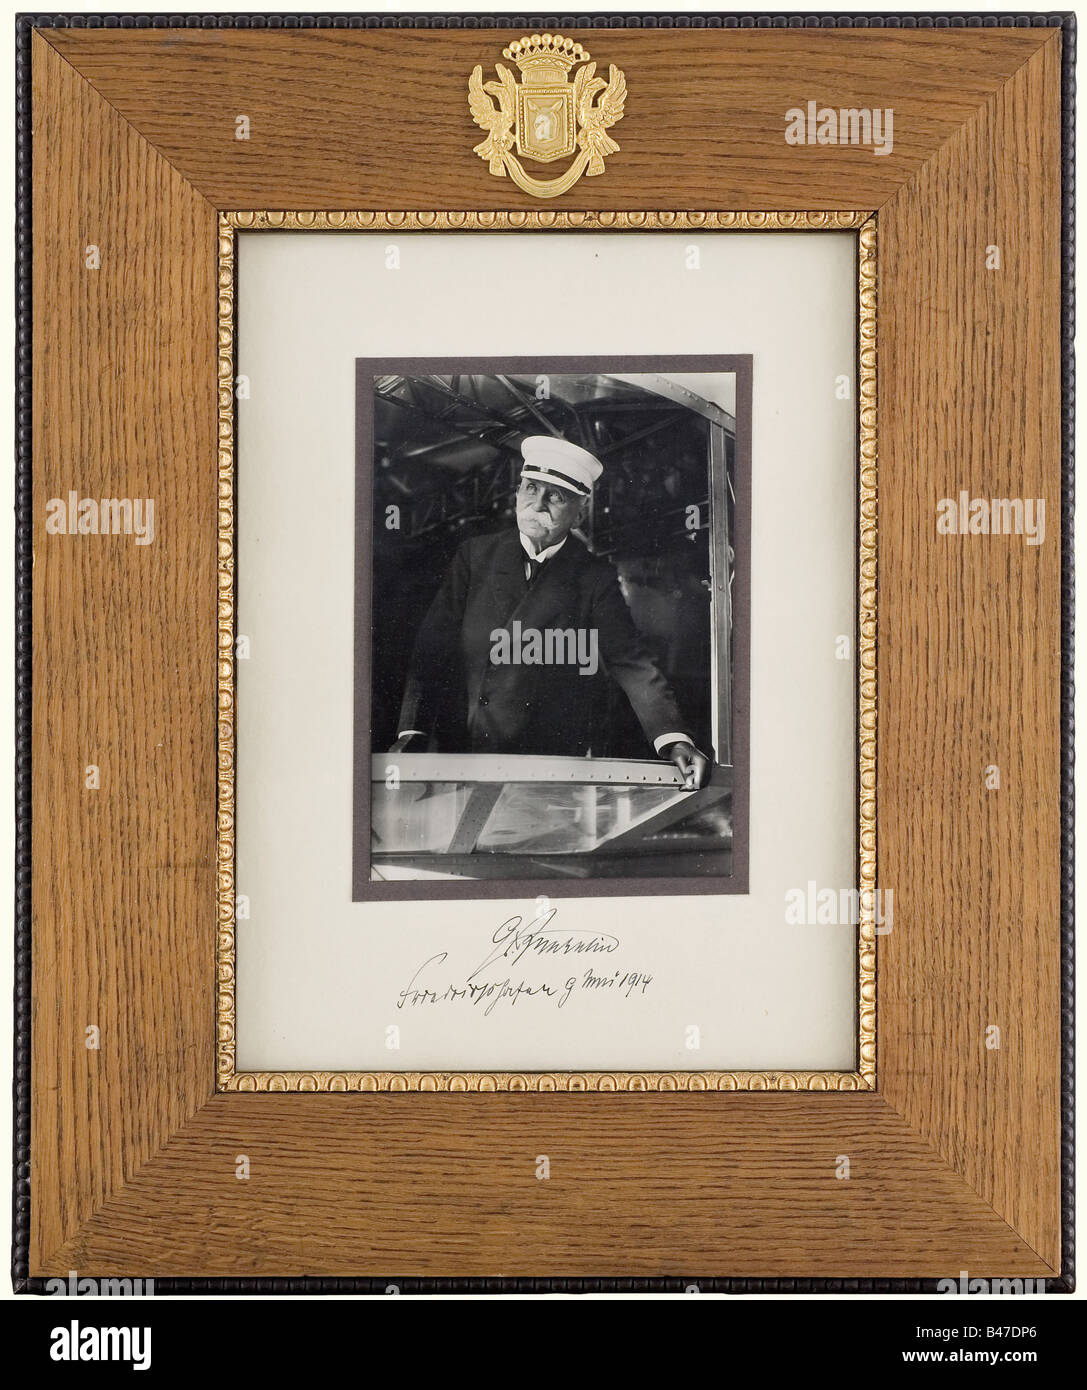 A portrait photograph of Count Ferdinand von Zeppelin., Large presentation portrait of the count on the bridge of an airship. Mount with handwritten autograph in blue ink 'Gr. Zeppelin - Friedrichshafen 9 Mai 1914'. Oak frame (47 x 56 cm) with applied gilt silver coat of arms of Count Zeppelin. On the verso an affixed envelope from the 1930s addressed to a Bavarian prince, enclosed old picture postcards ZI, an admission ticket for the airship viewing and an original letter paper of the German Zeppelin shipping company 'Luftschiff Hindenburg - An Bord' with a pi, Stock Photo